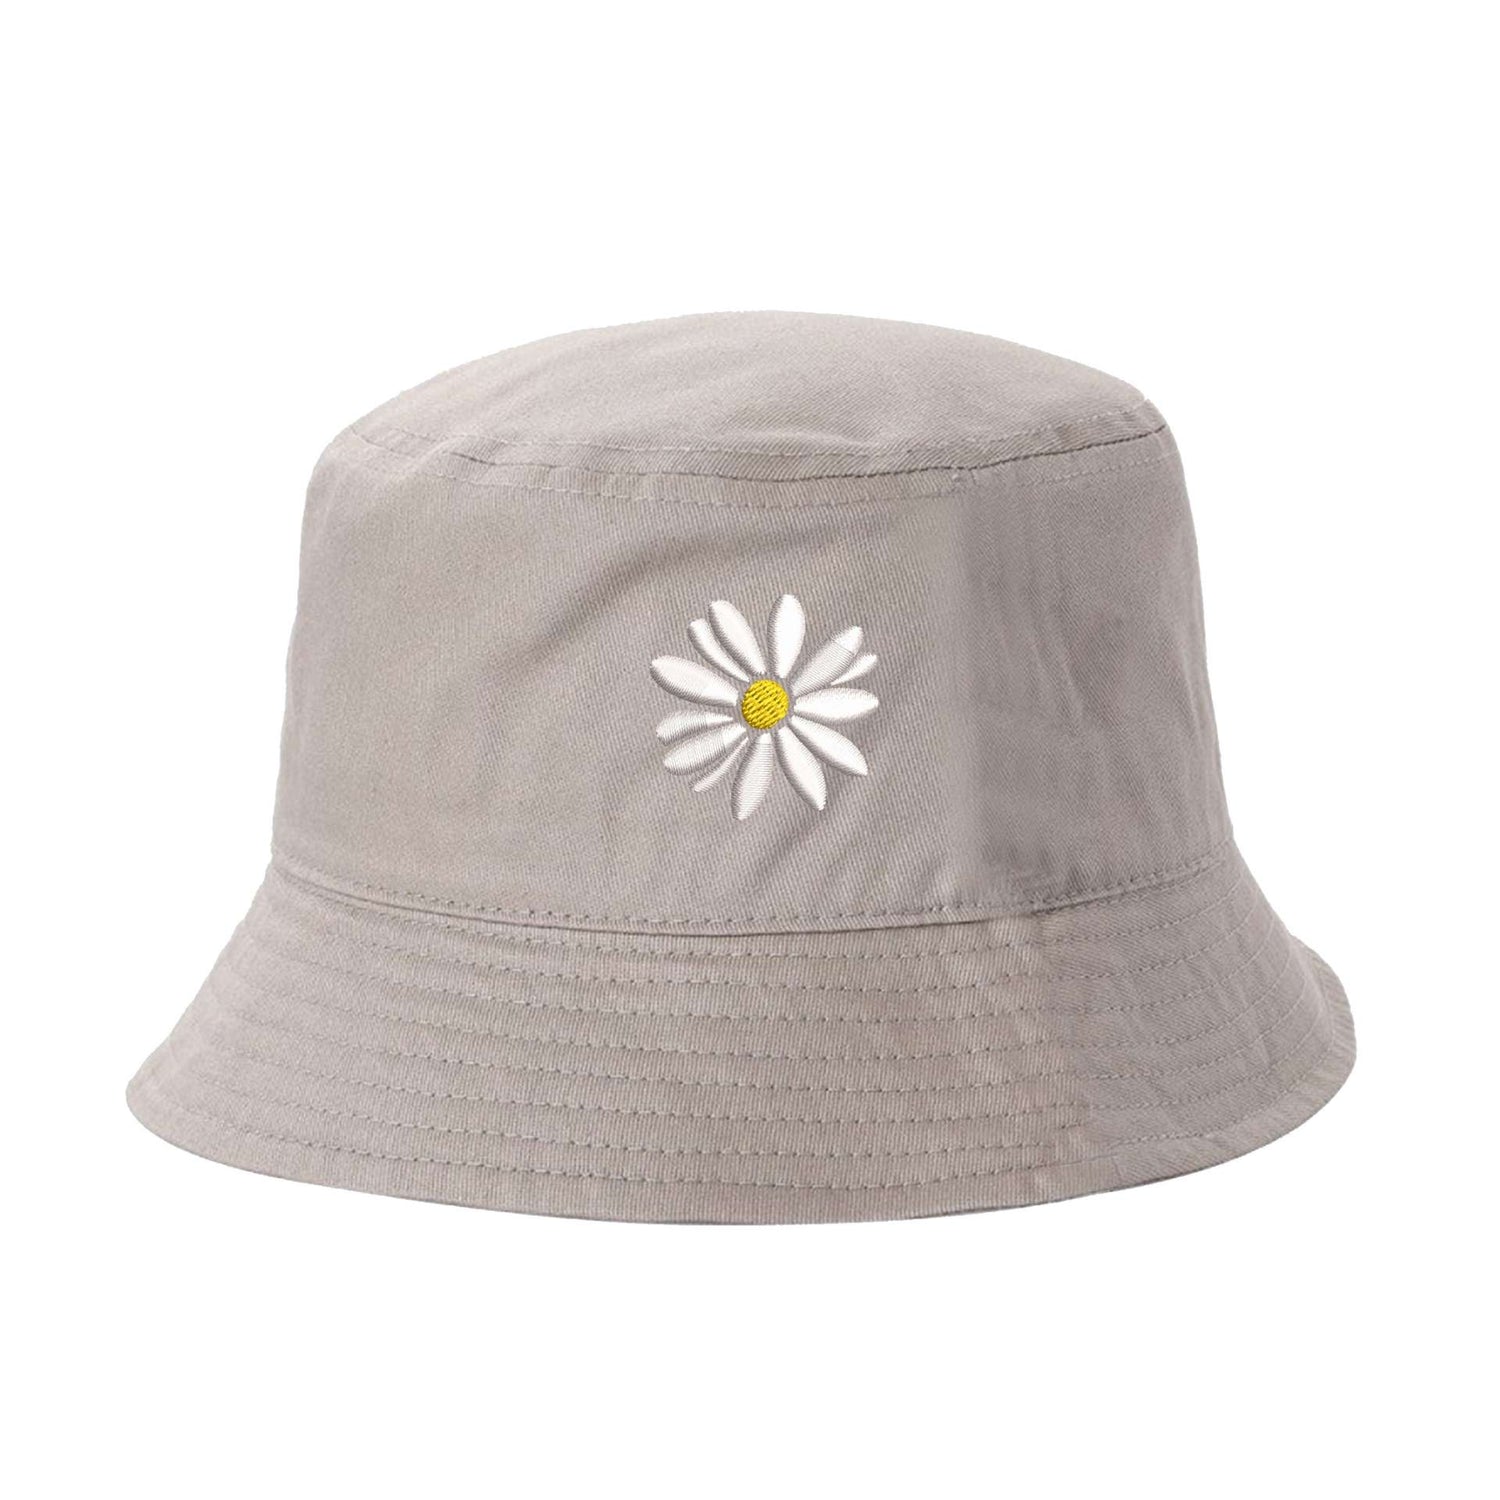 Khaki Bucket hat embroidered with a daisy flower - DSY Lifestyle